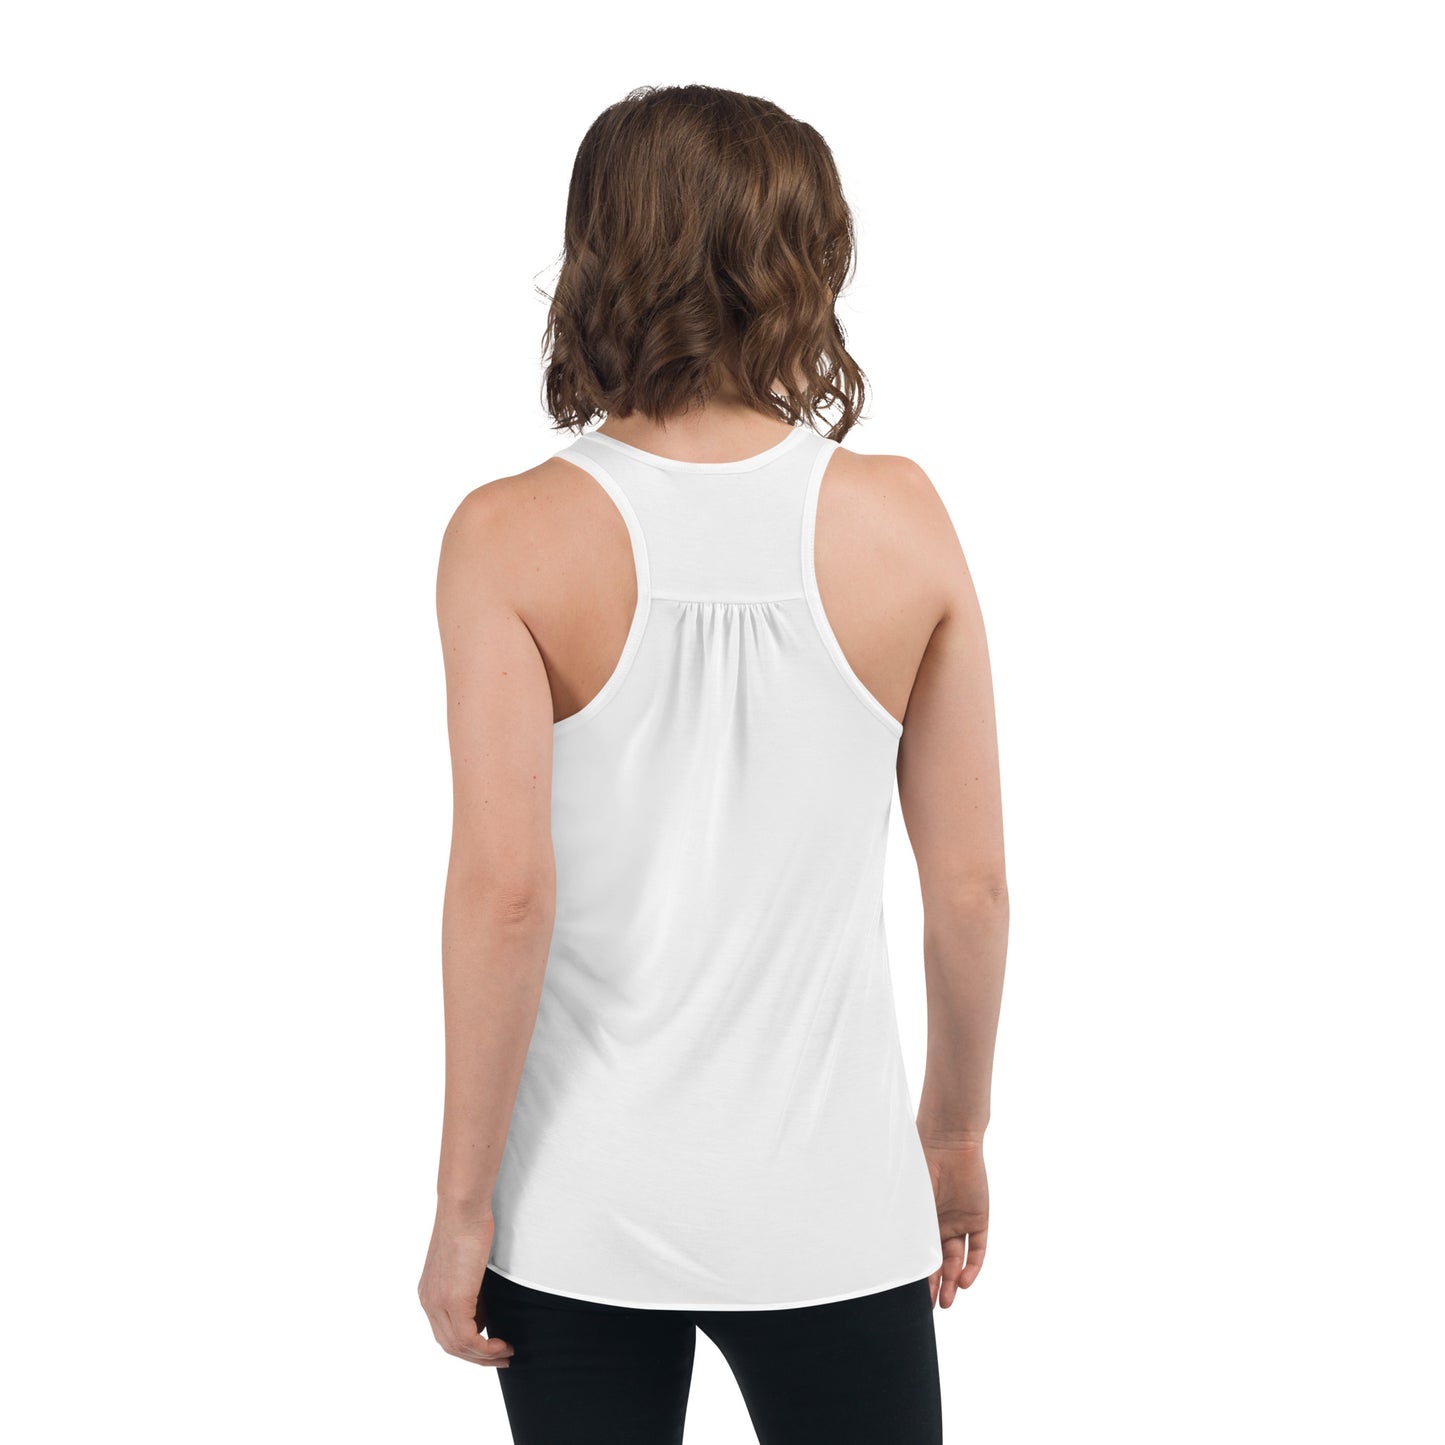 World's Greatest Mom - Flowy Racerback Tank - Available in Several Colors